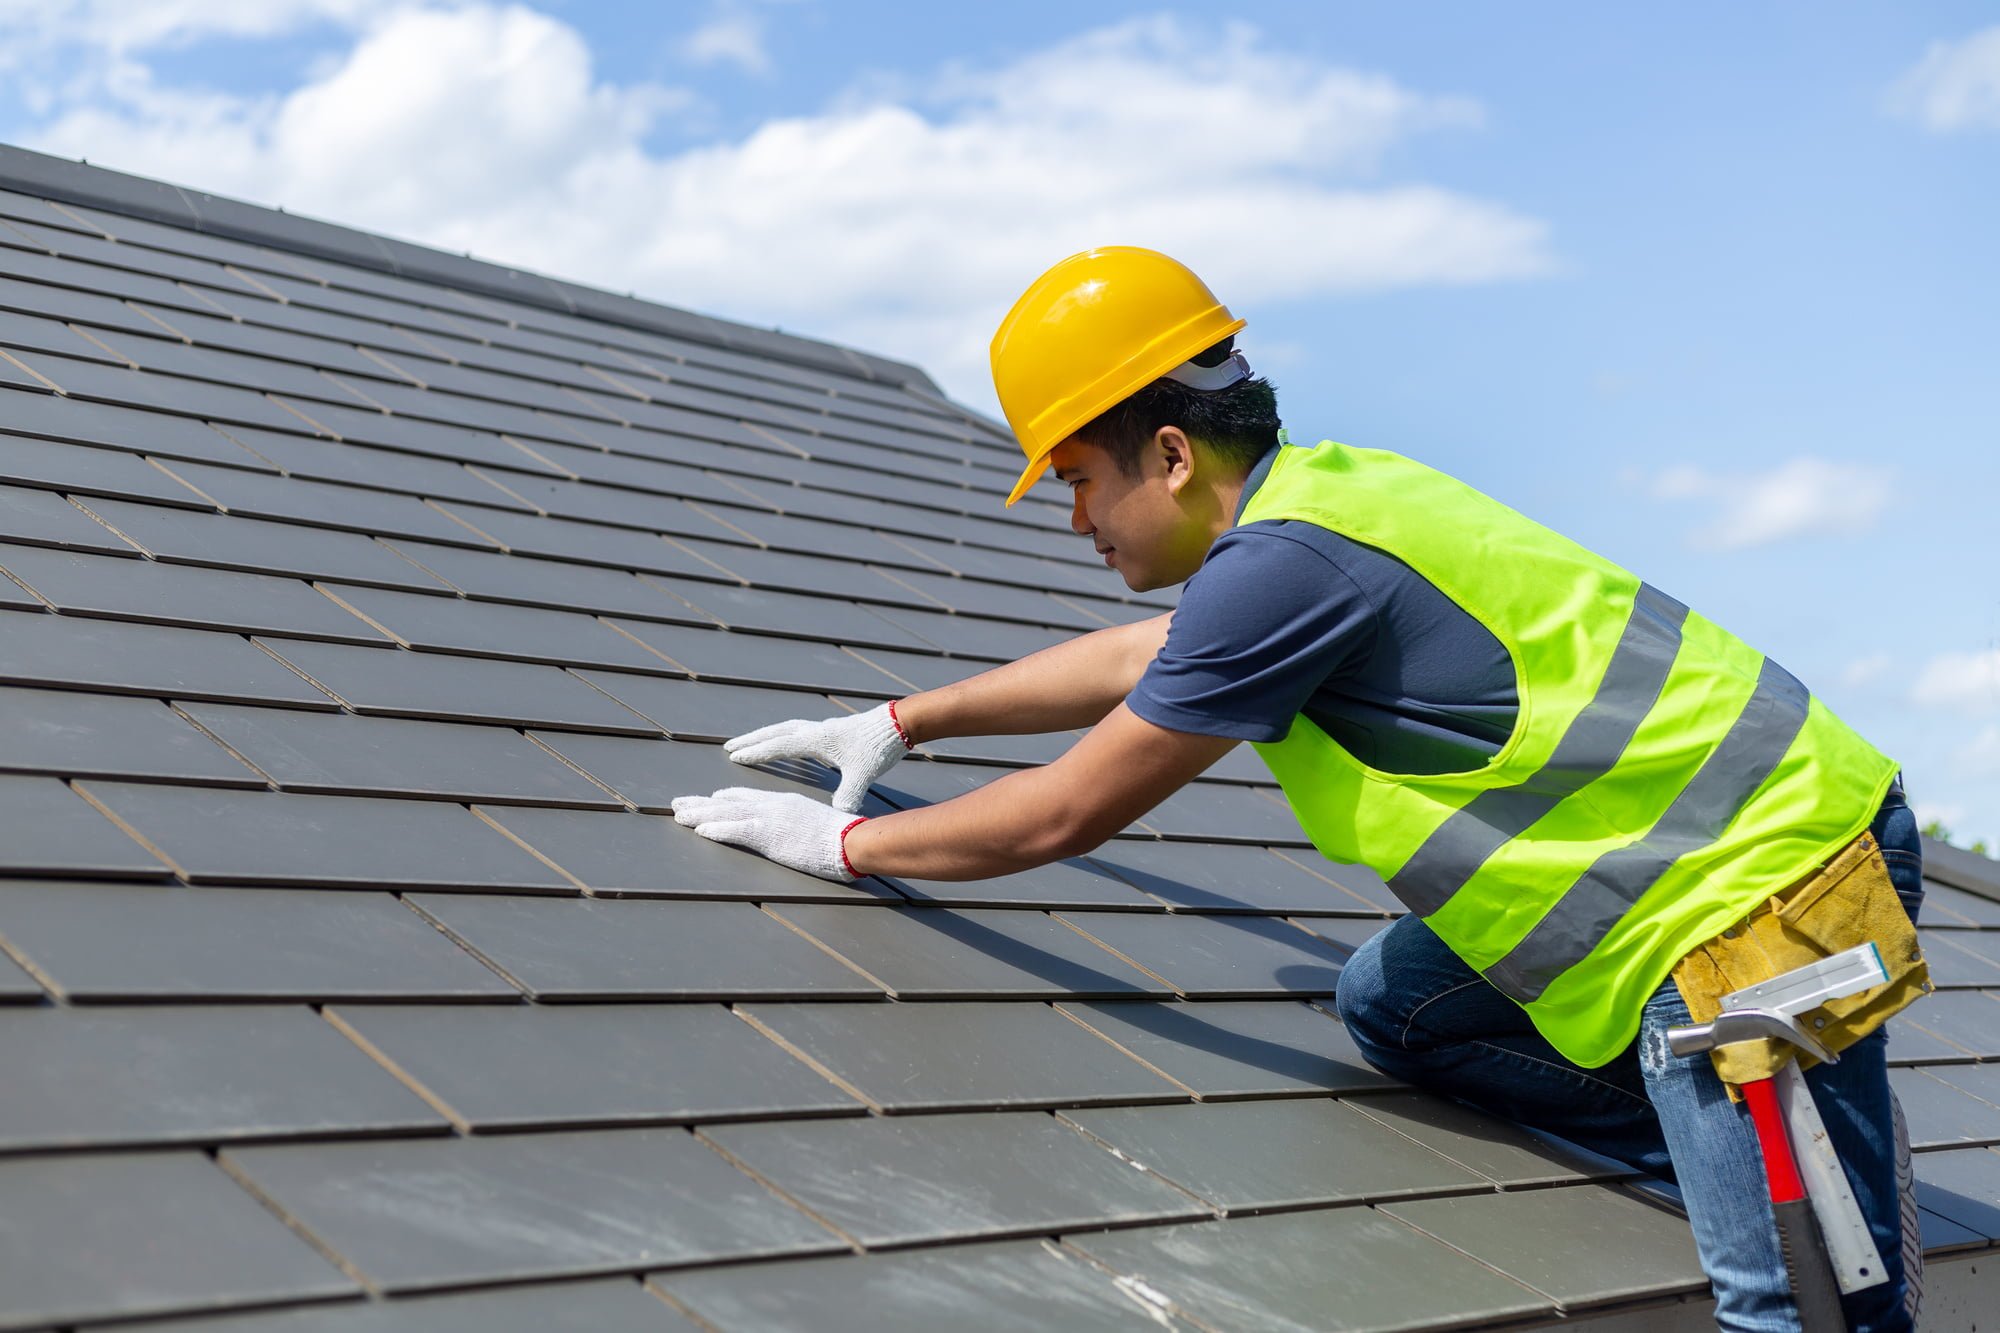 Roof Repair, Worker With White Gloves Replacing Gray Tiles Or Shingles On House With Blue Sky As Background And Copy Space, Roofing Construction Worker Standing On A Roof Covering It With Tiles.